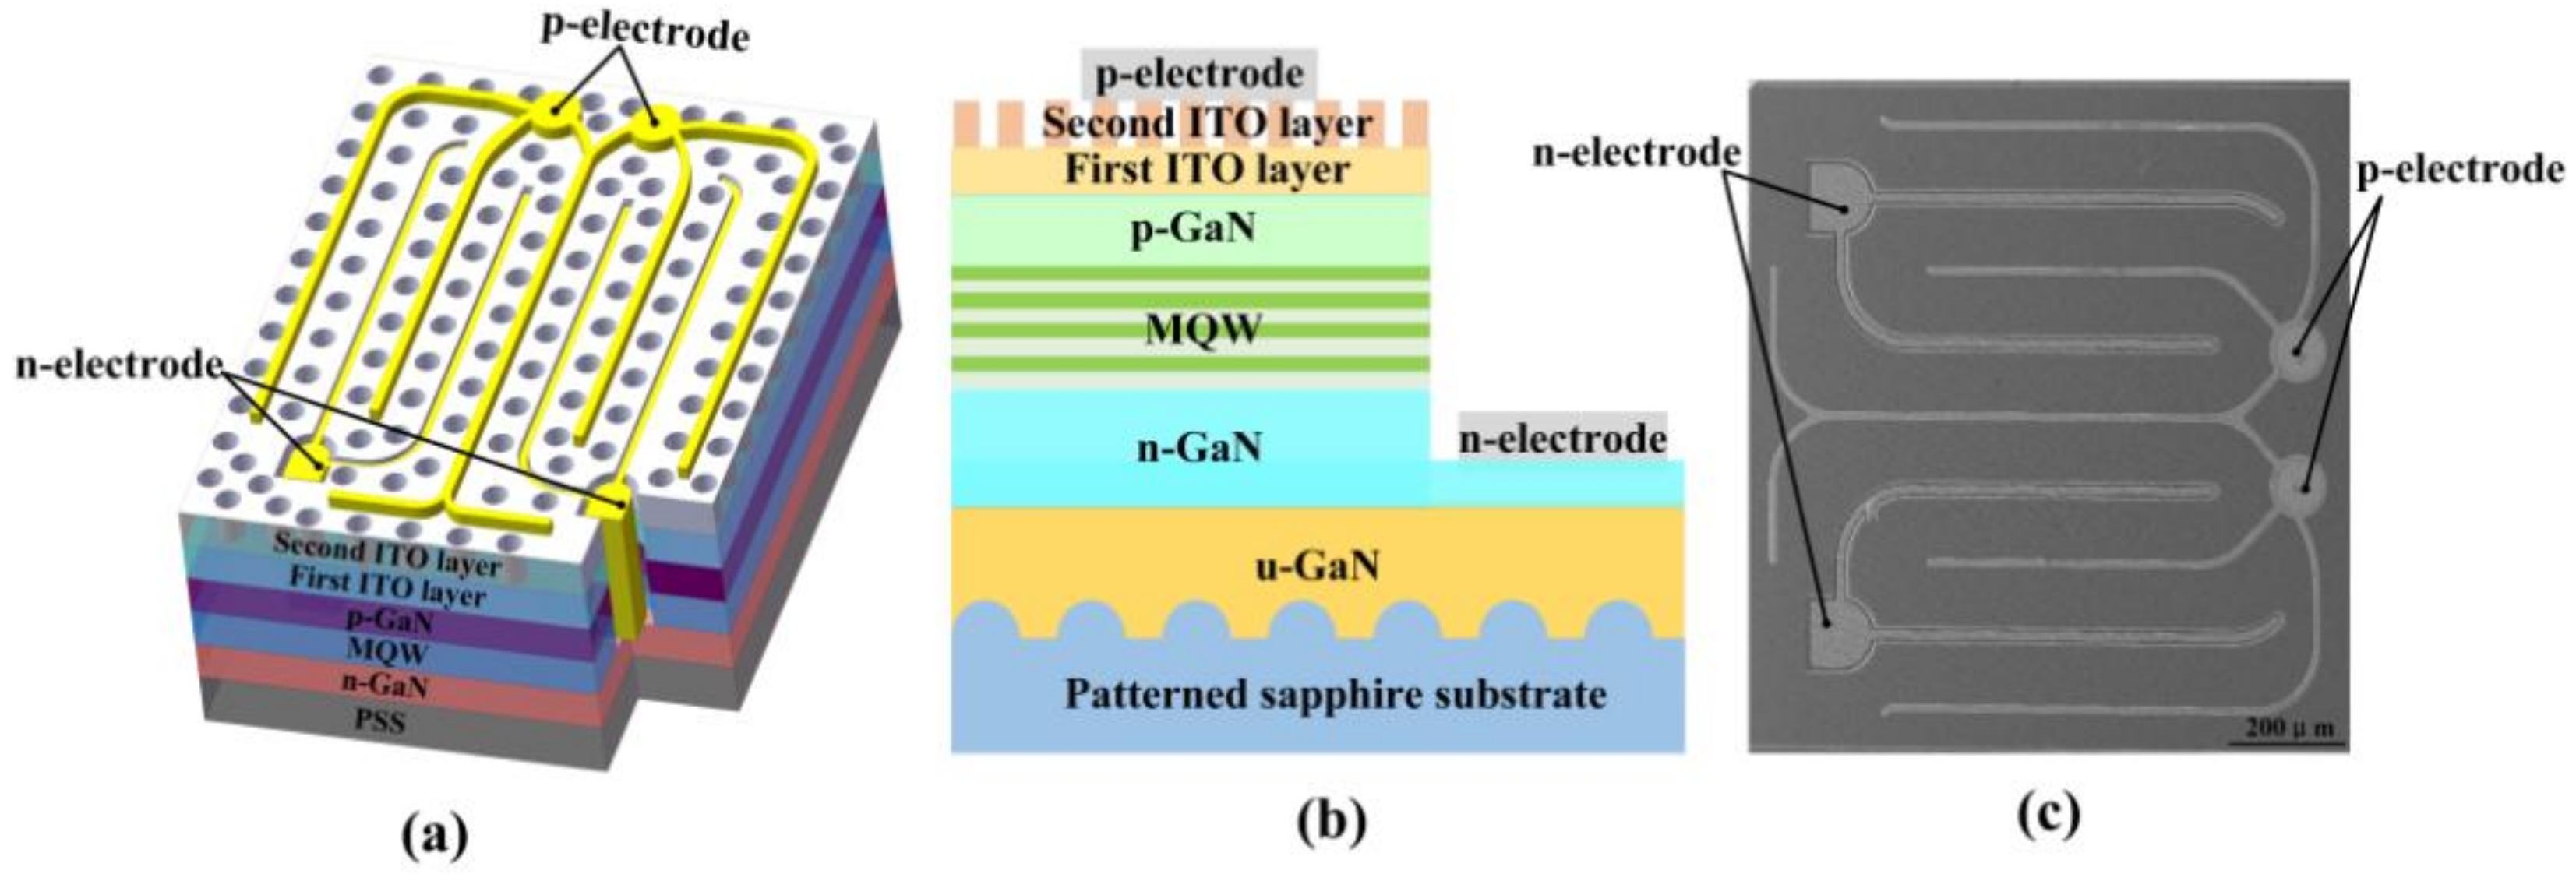 Nanomaterials | Free Full-Text | Improvement in Light Output of Ultraviolet  Light-Emitting Diodes with Patterned Double-Layer ITO by Laser Direct  Writing | HTML